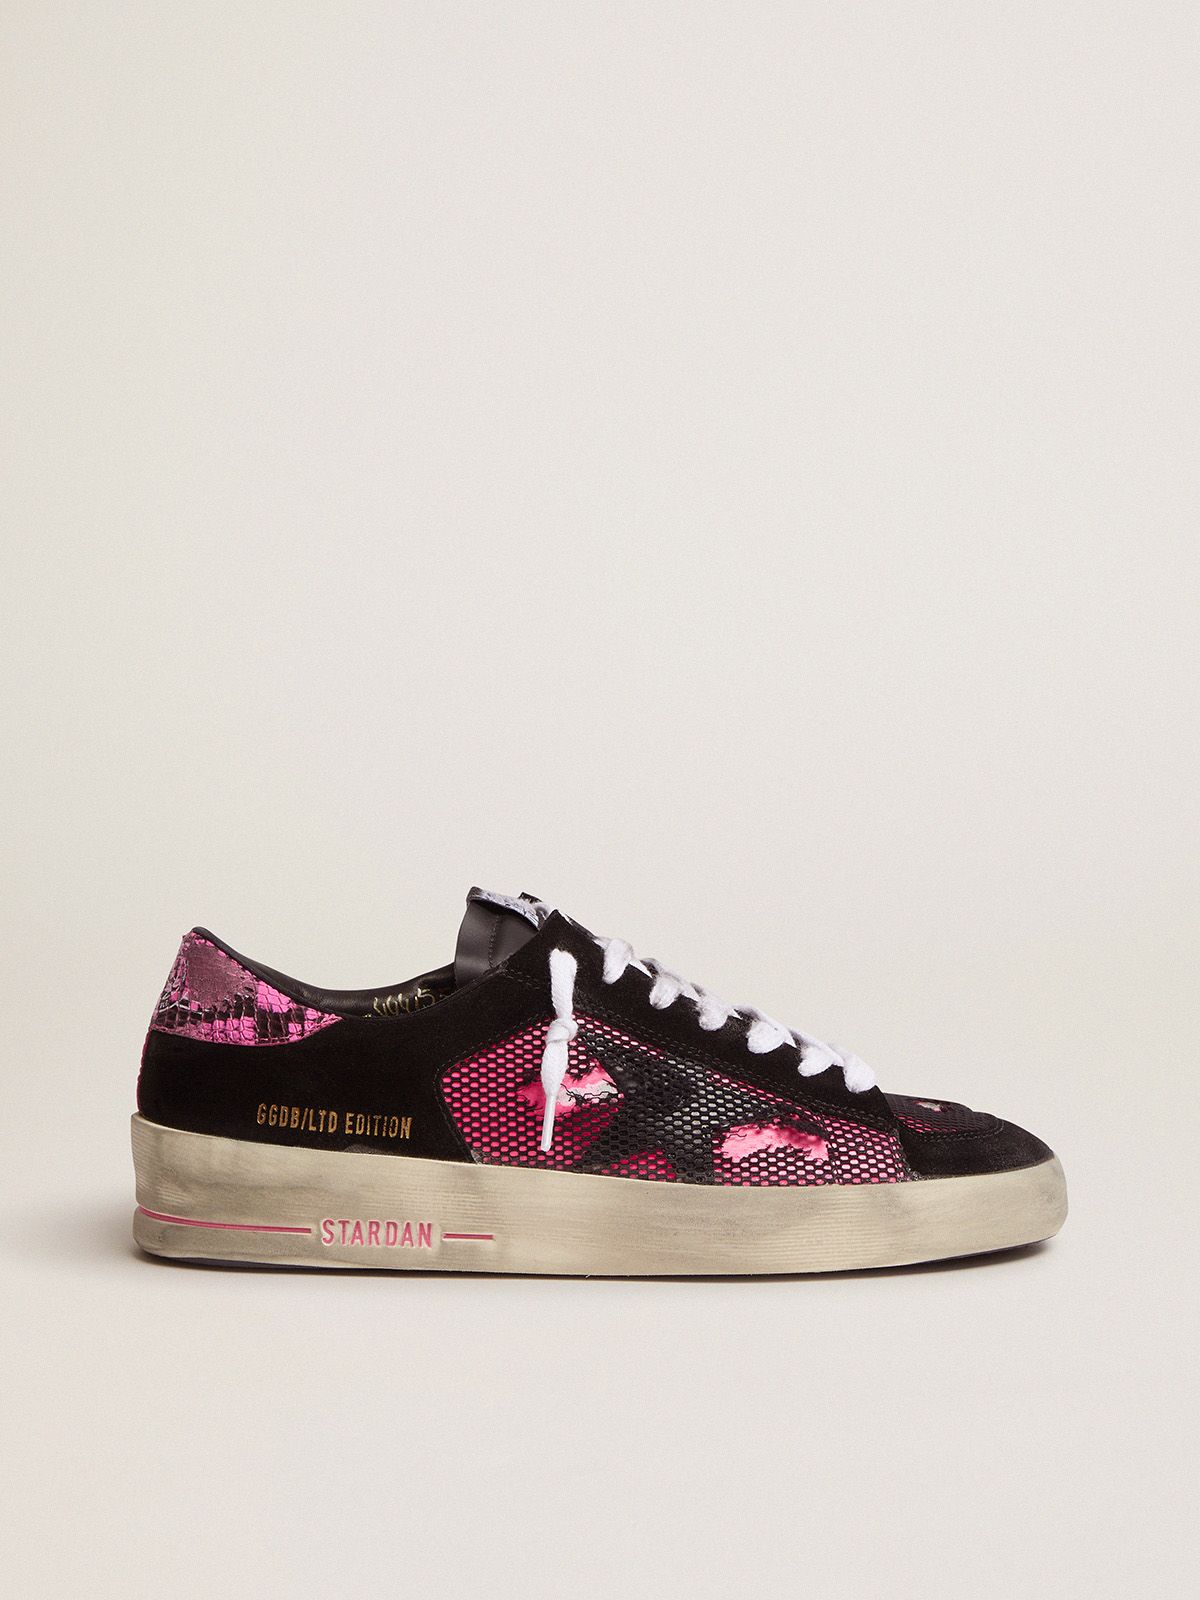 golden goose sneakers black Fuchsia Limited Stardan LAB and Edition